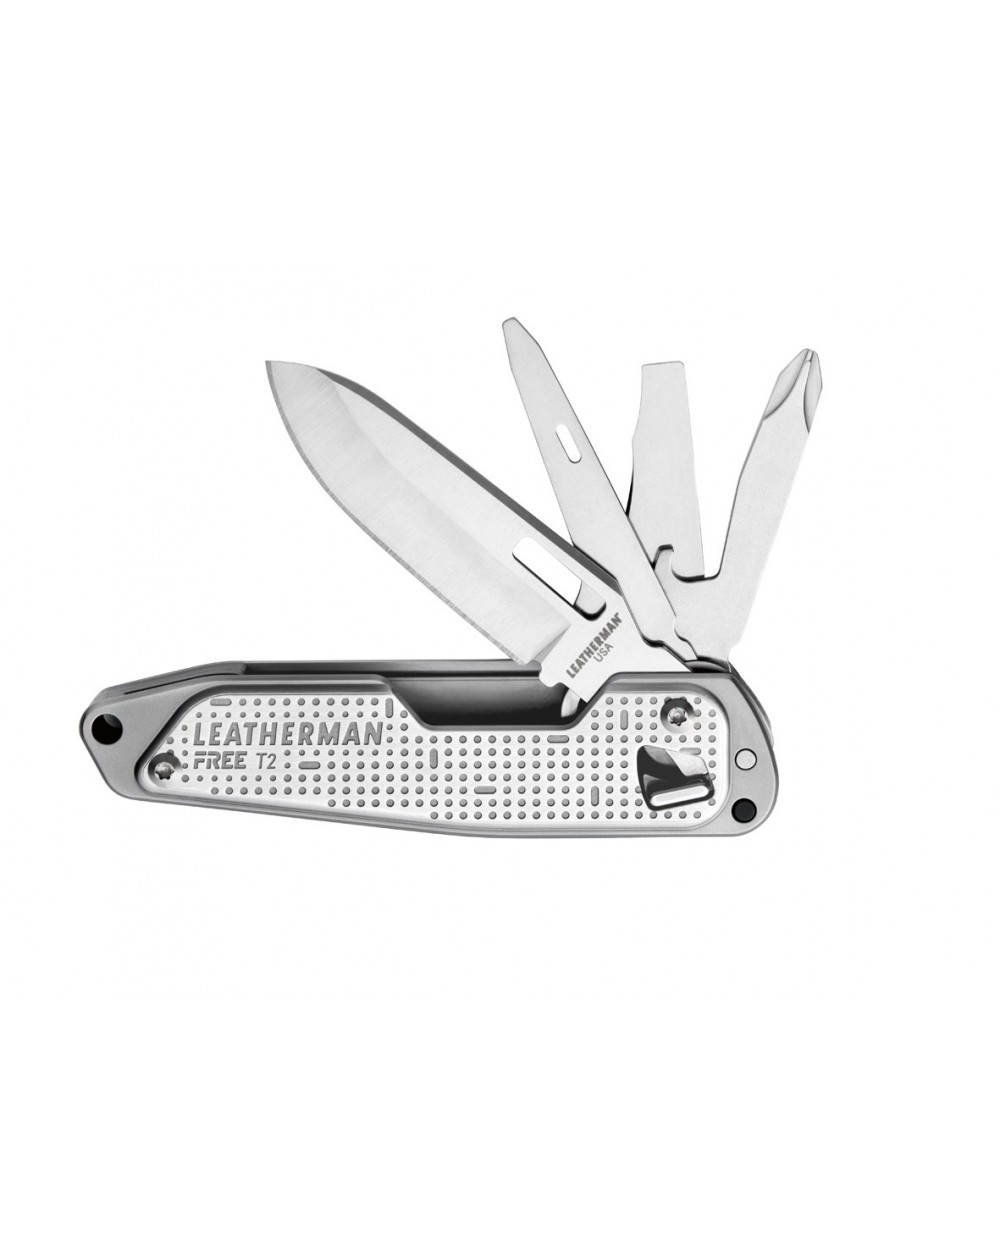 leatherman-pince-multifonctions-free-t2-832682-1